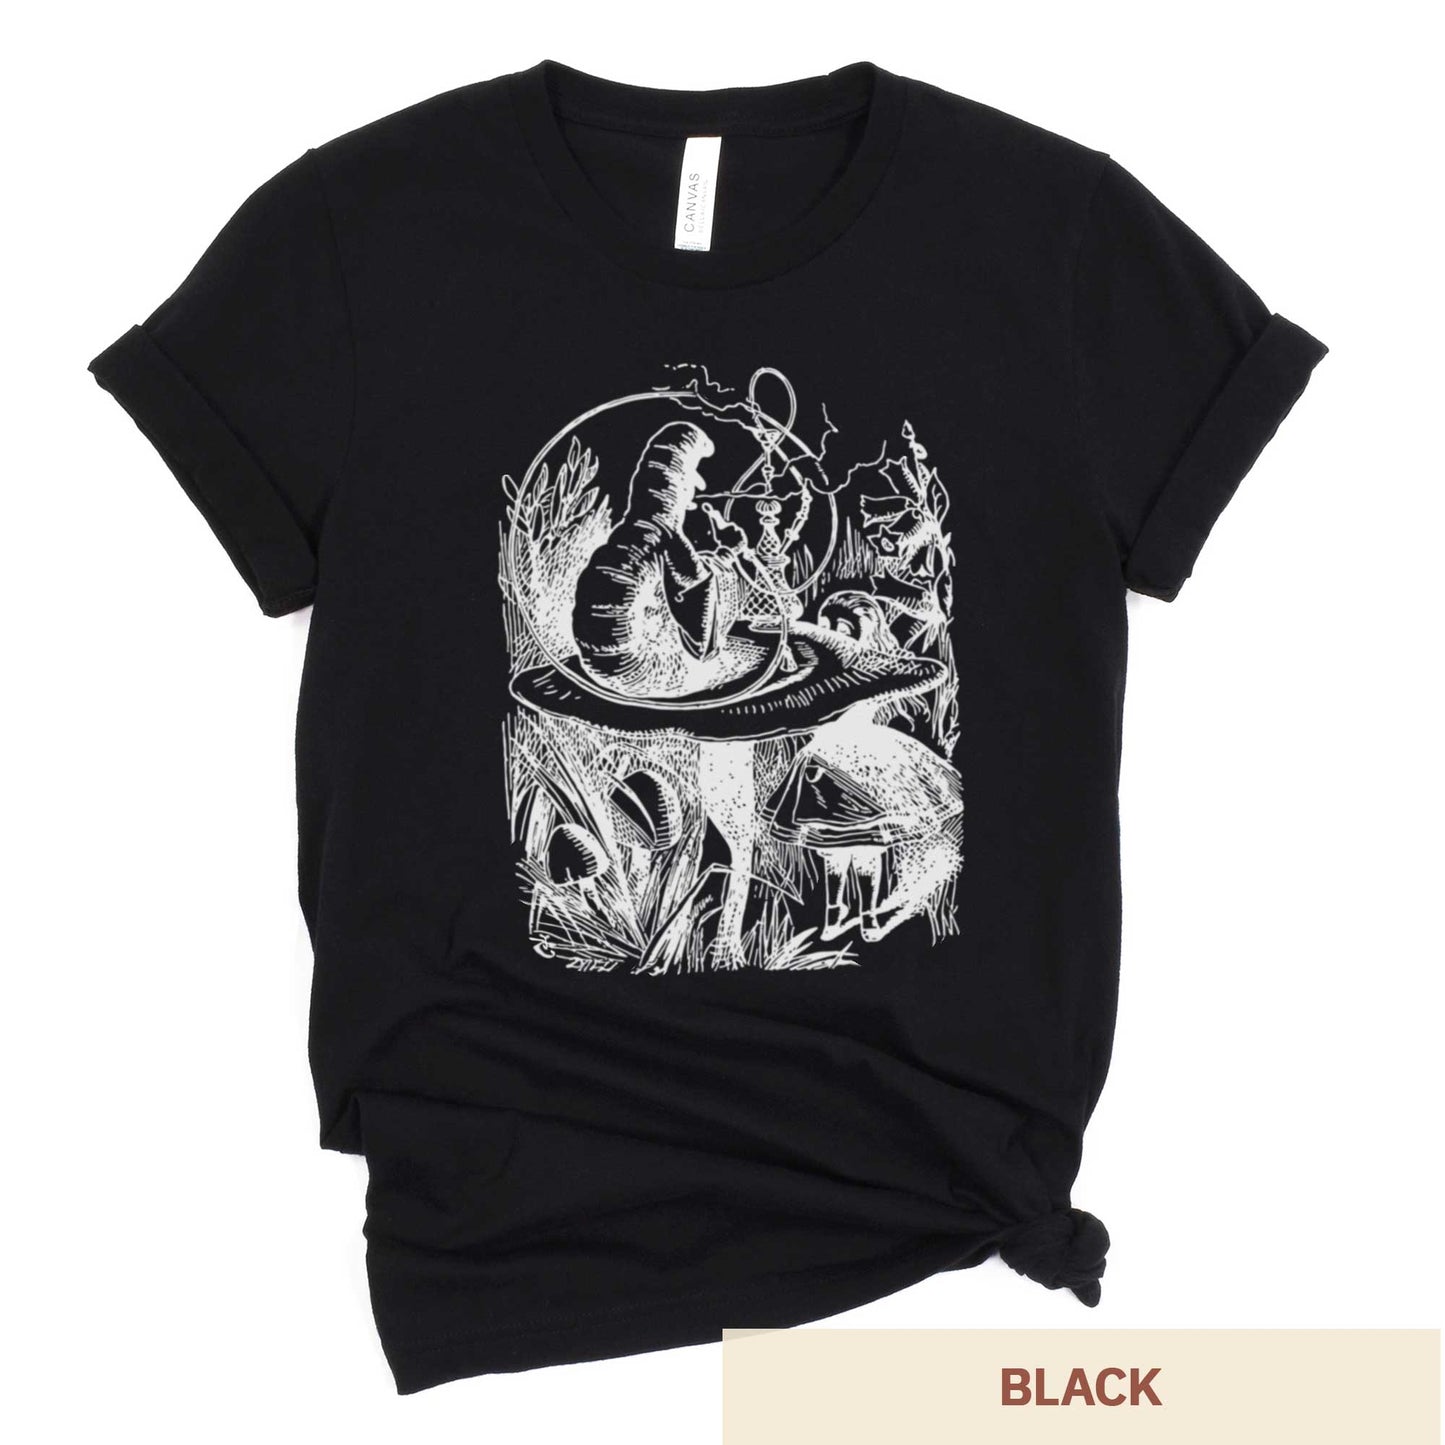 A black Bella Canvas t-shirt featuring the John Tenniel illustration of Alice in Wonderland meeting the caterpillar who is sitting on a mushroom.